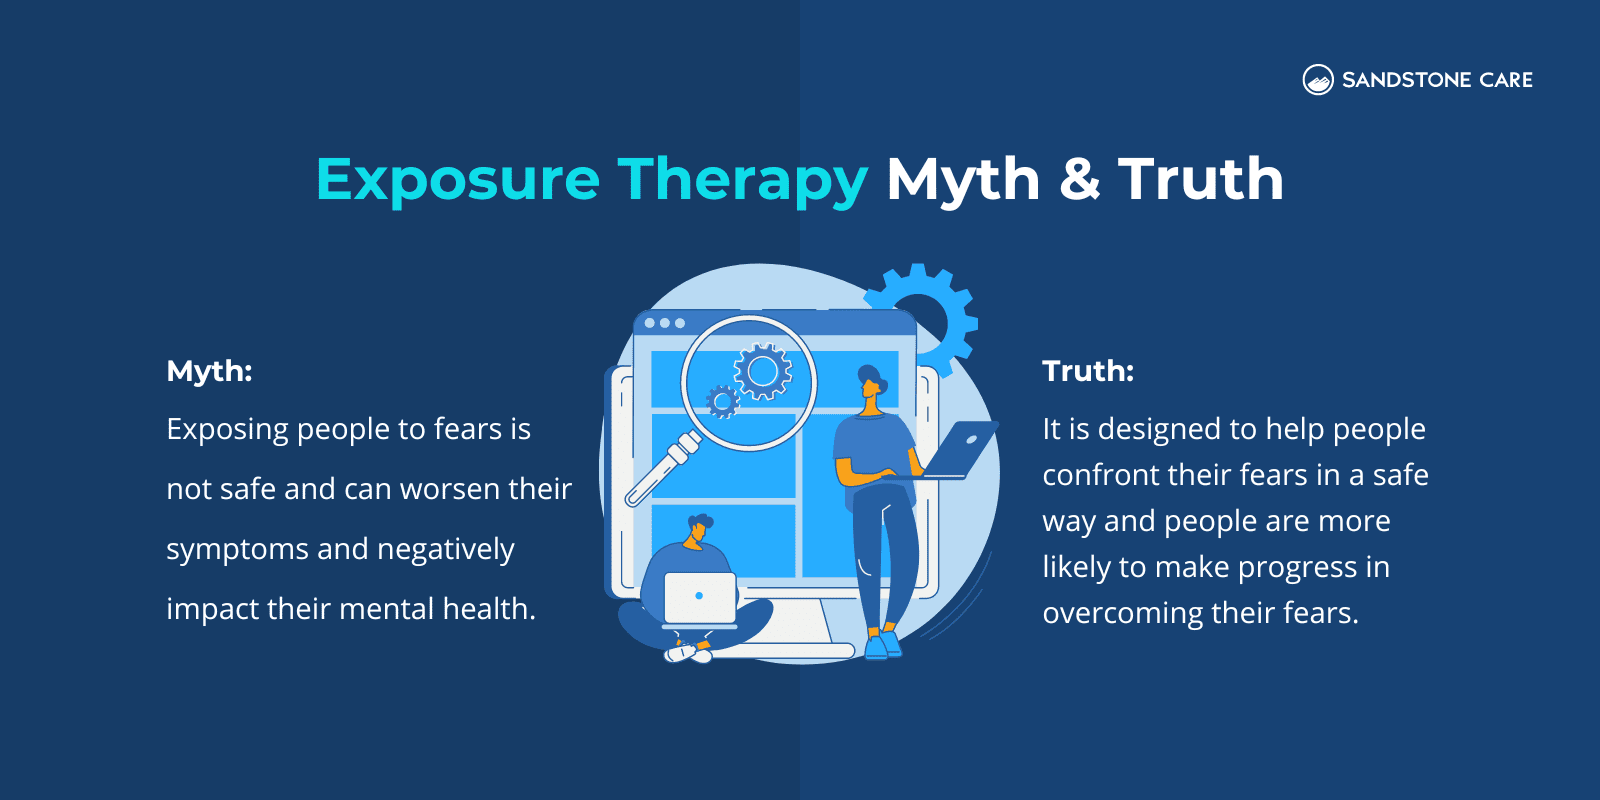 "Exposure Therapy Myth & Truth" text is written above myth and truth with an illustration of two people analyzing the data